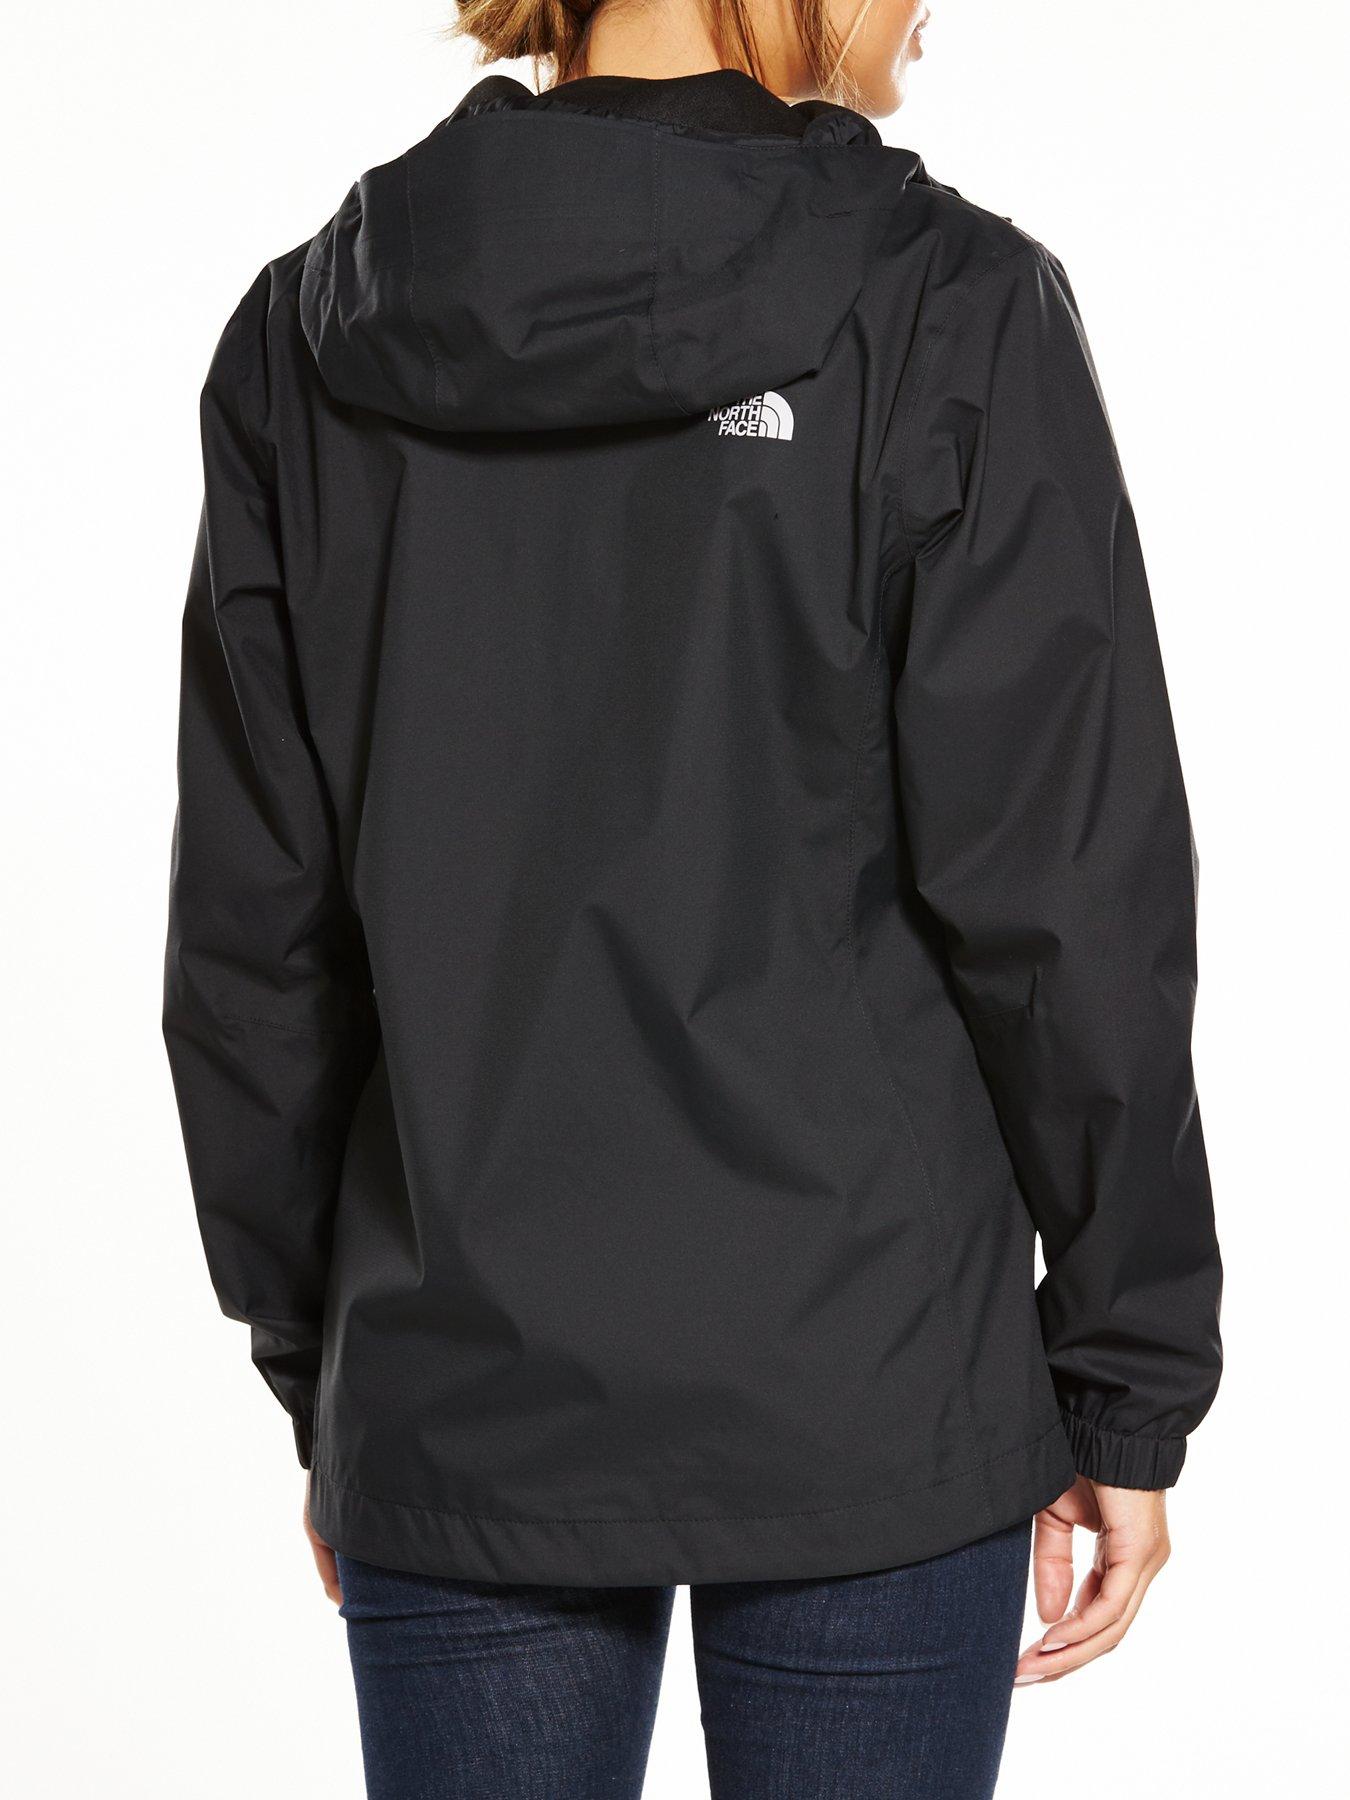 THE NORTH FACE Quest Jacket - Black | very.co.uk